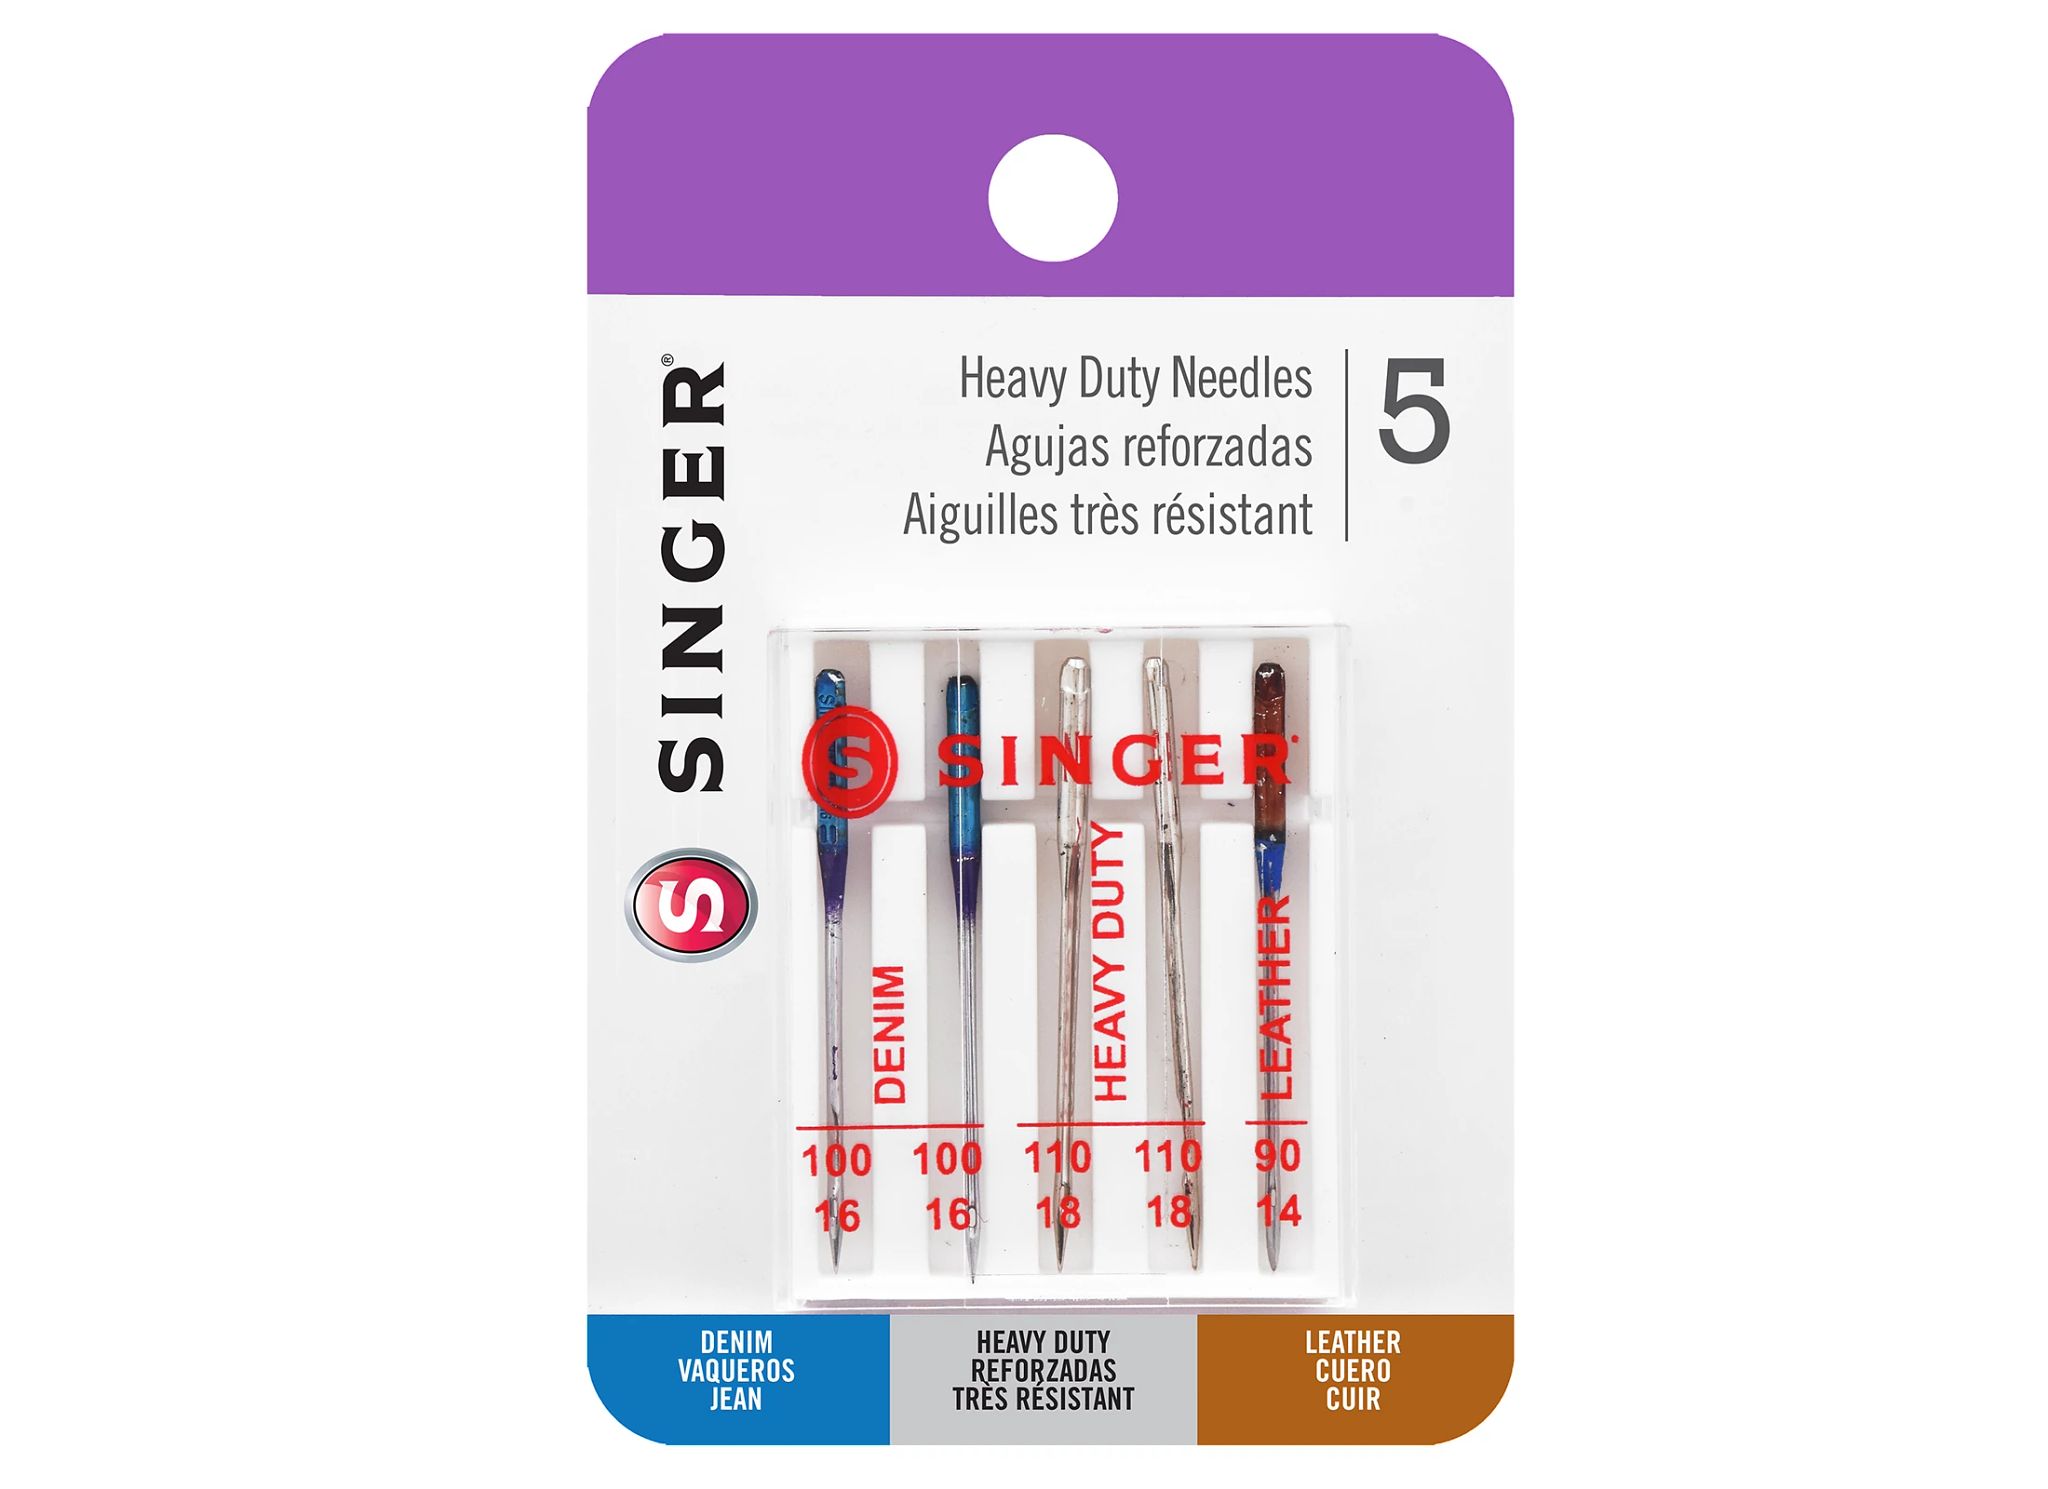 SINGER Heavy Duty Sewing Machine Needles, Size 100/16 - 5 110/18 - 5 Count